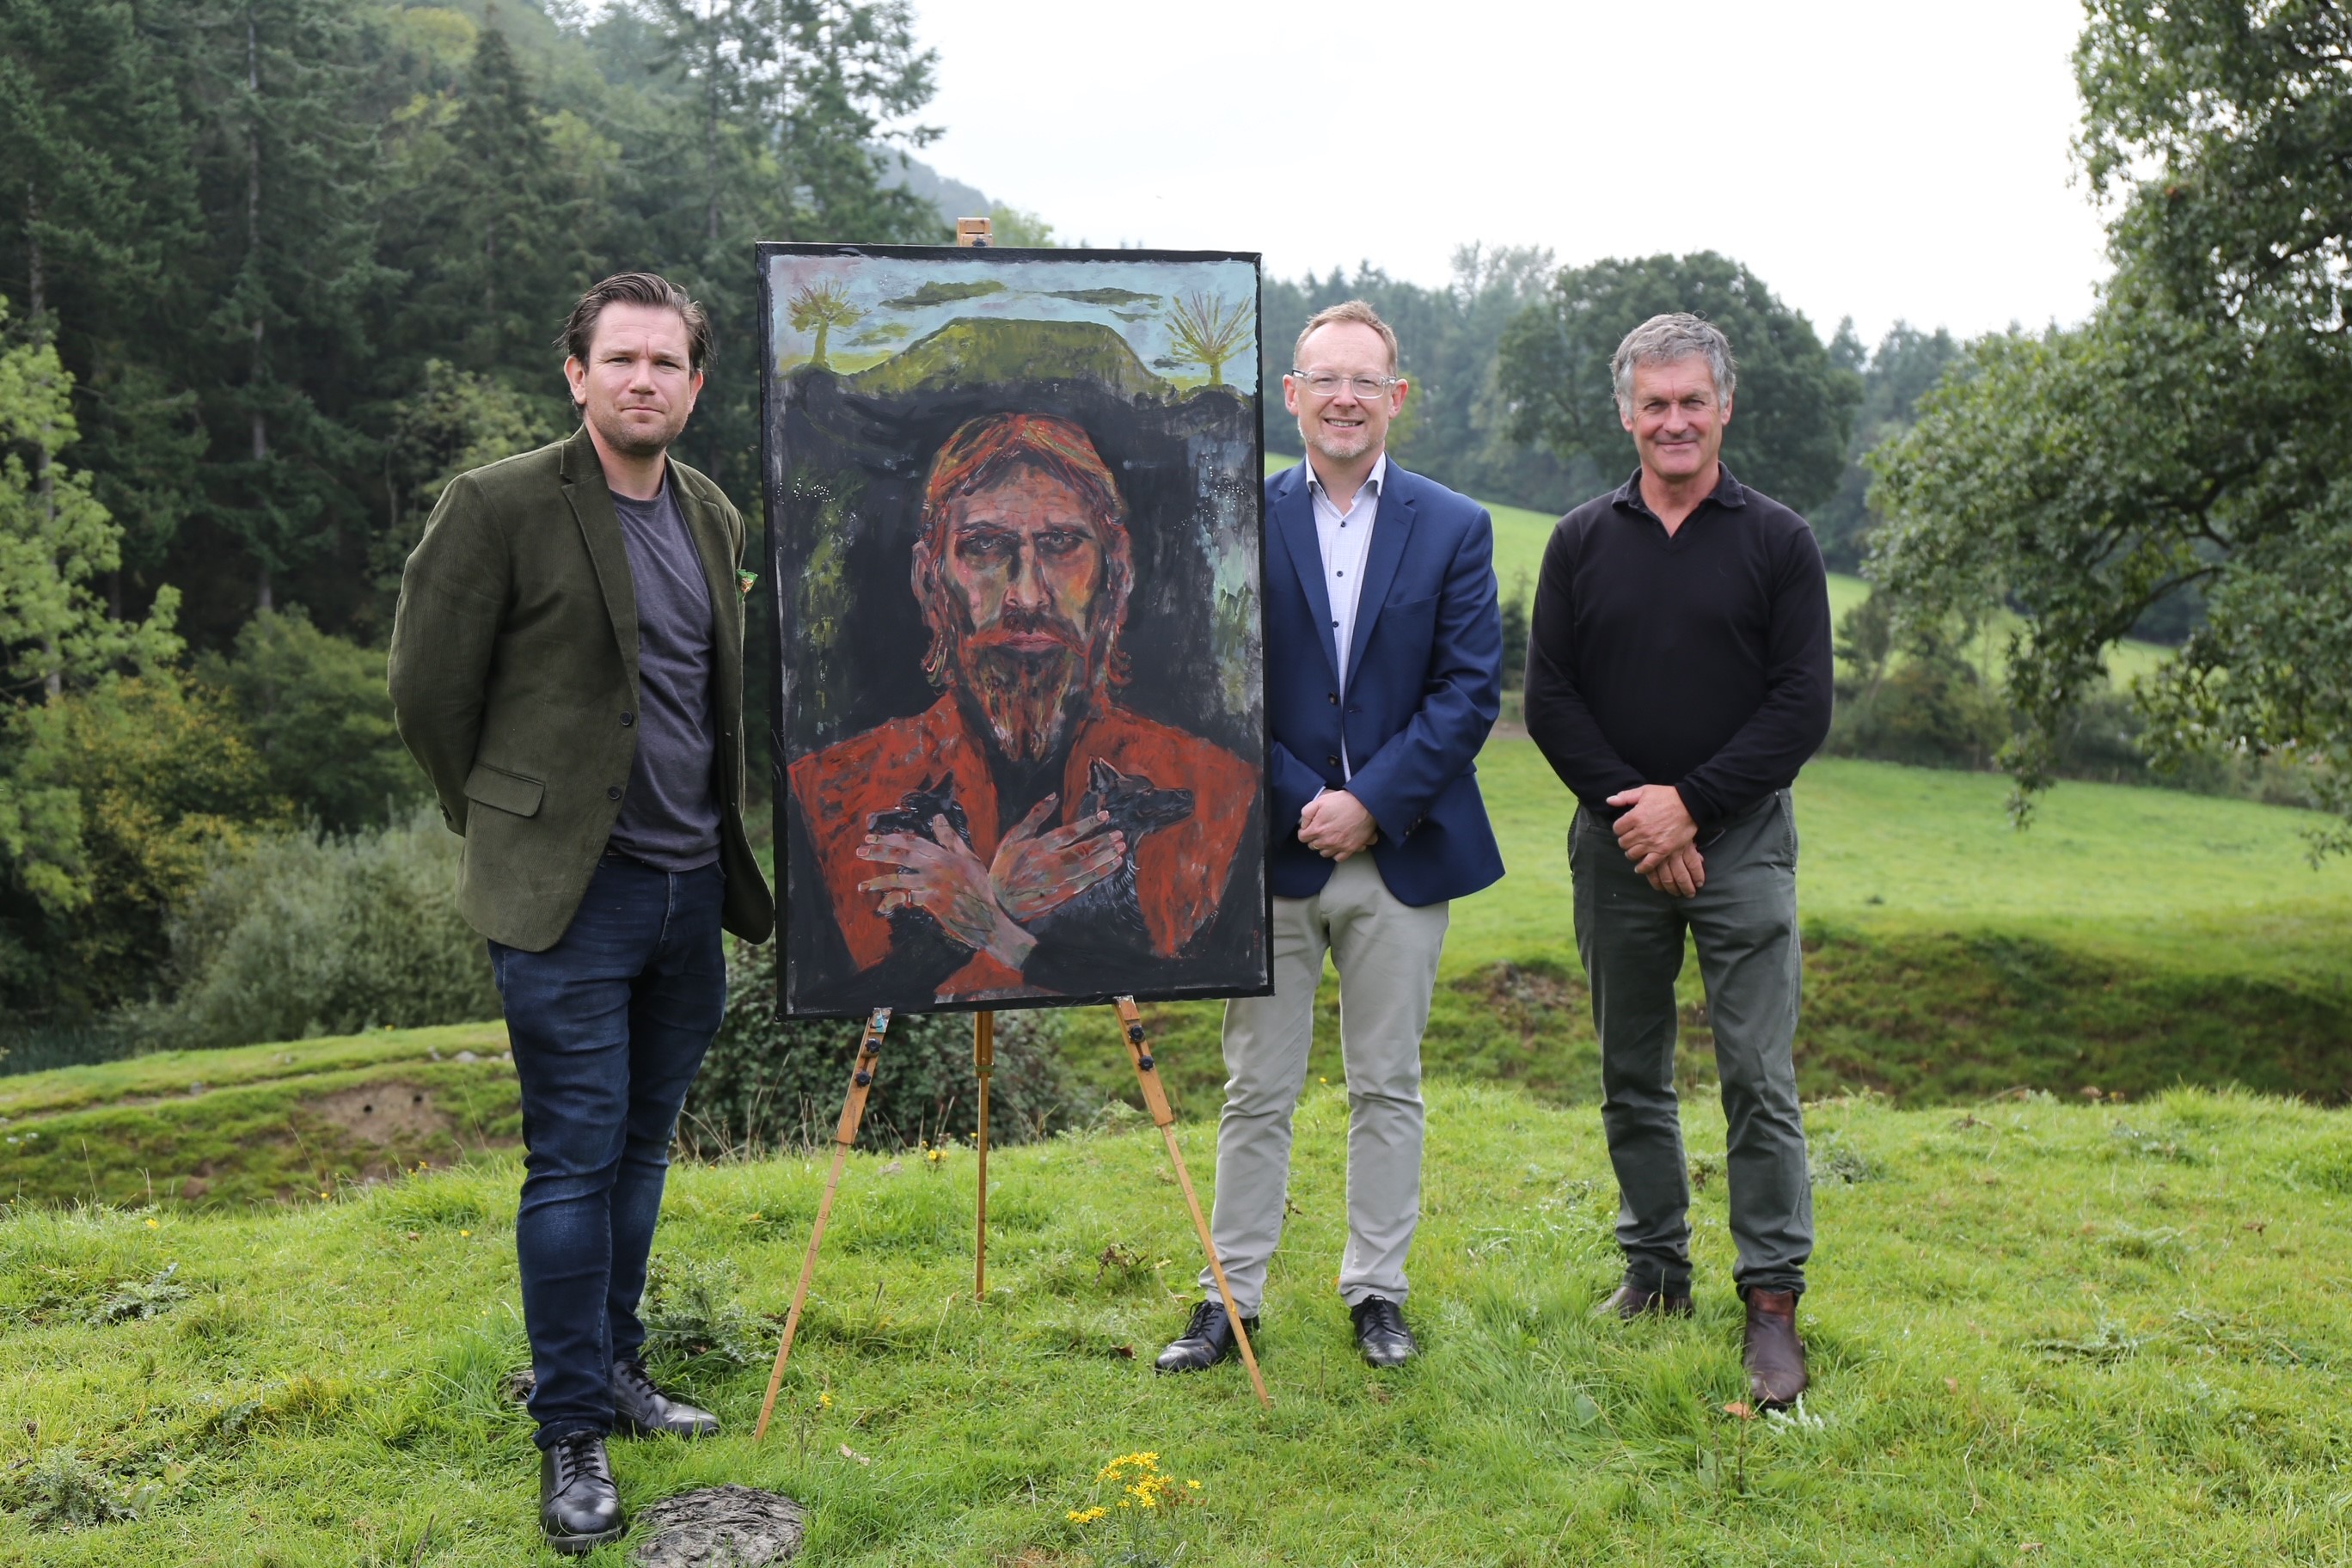 (from left) Artist Dan Llywelyn Hall, Montgomeryshire MS Russell George and Powys County Councillor Aled Davies at the unveiling of the painting of Owain Glyndwr at the site of Sycharth (Dan Llywelyn Hall/PA)